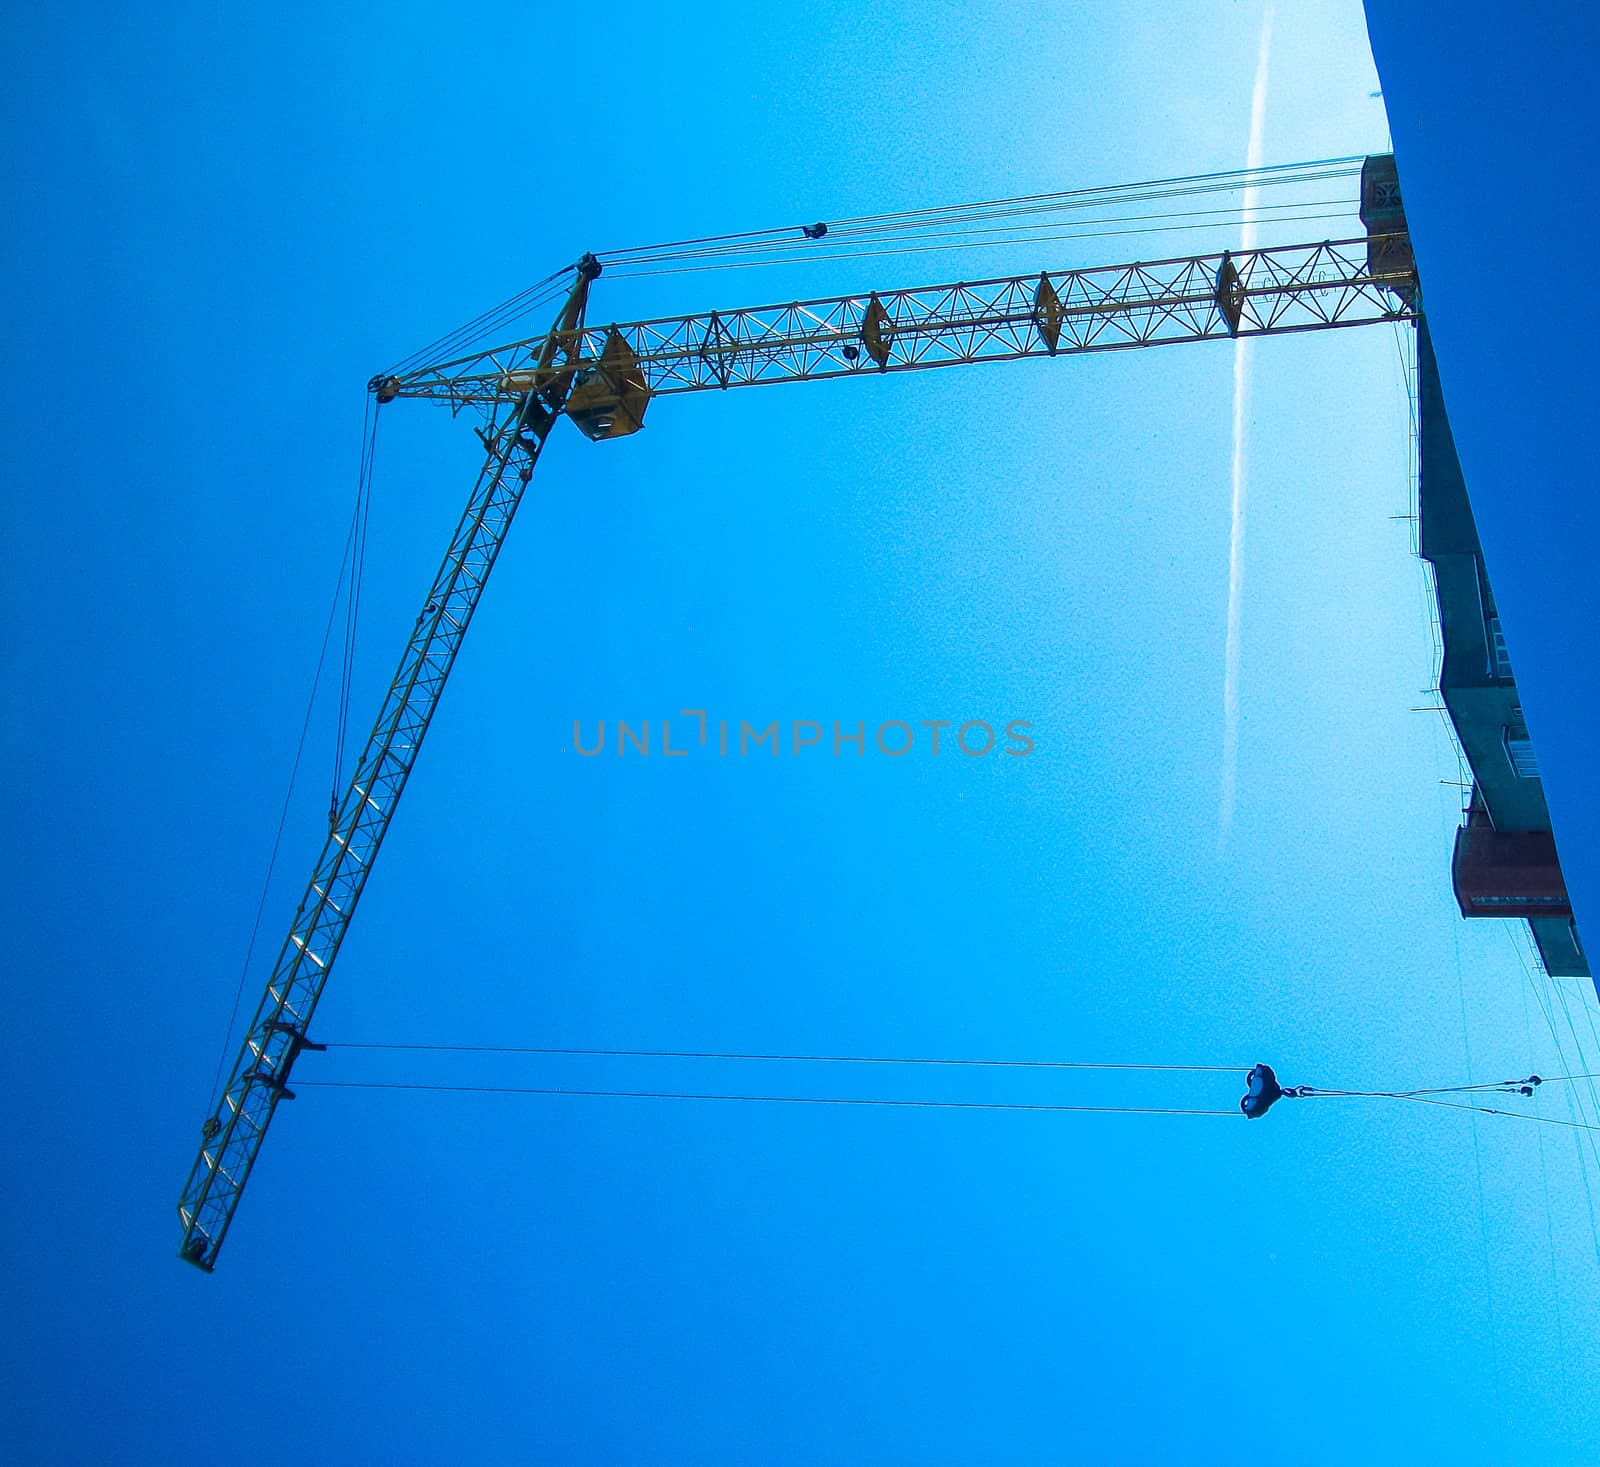 In winter the construction work of a crane